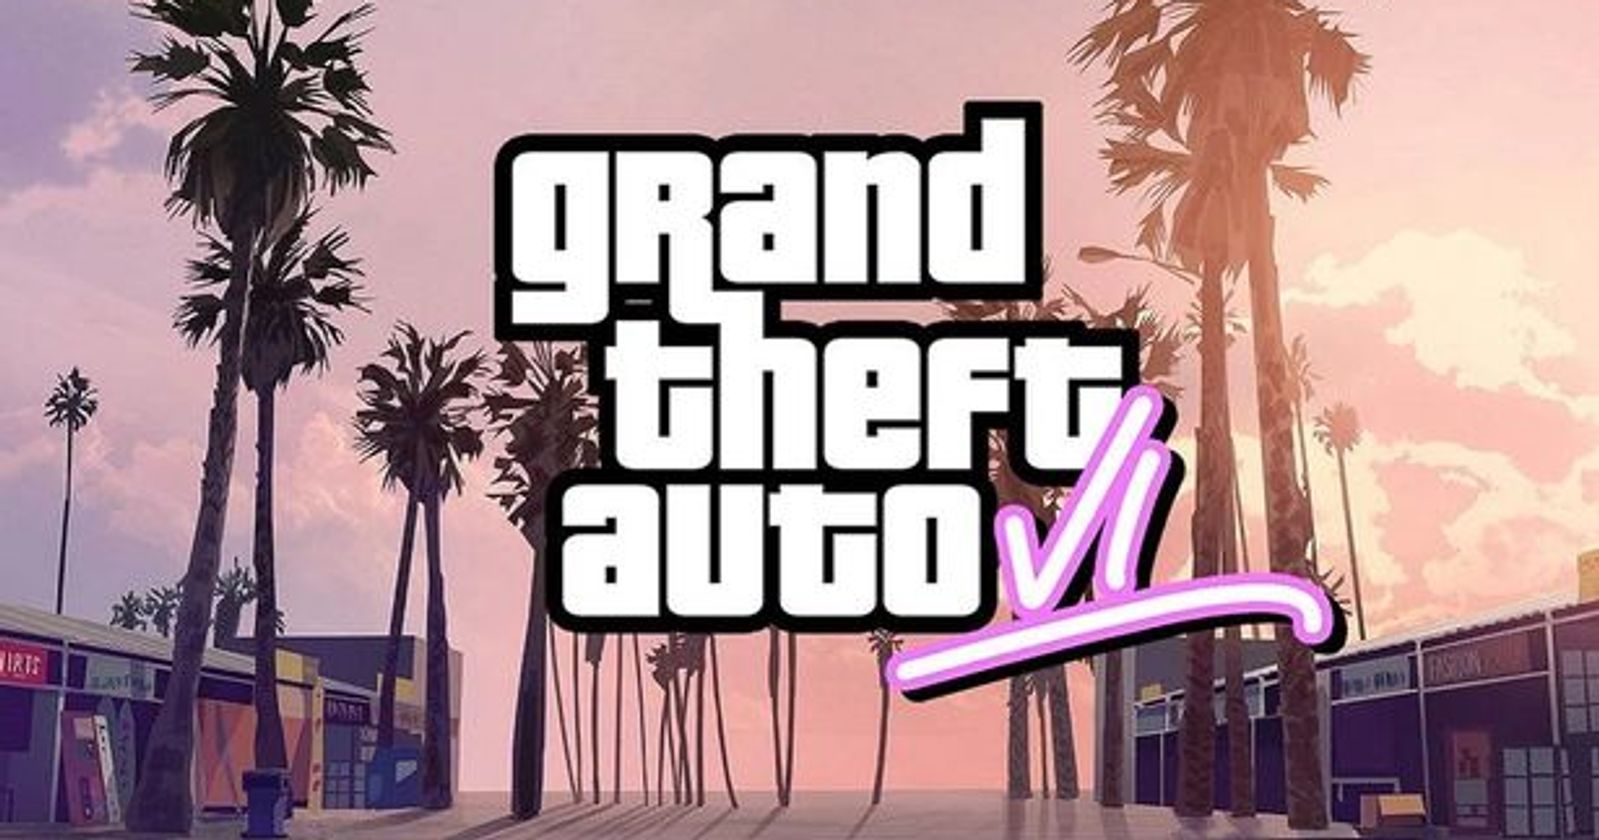 GTA 6: Release Date, Leaks, Rumors, Gameplay, Map, Characters, and More